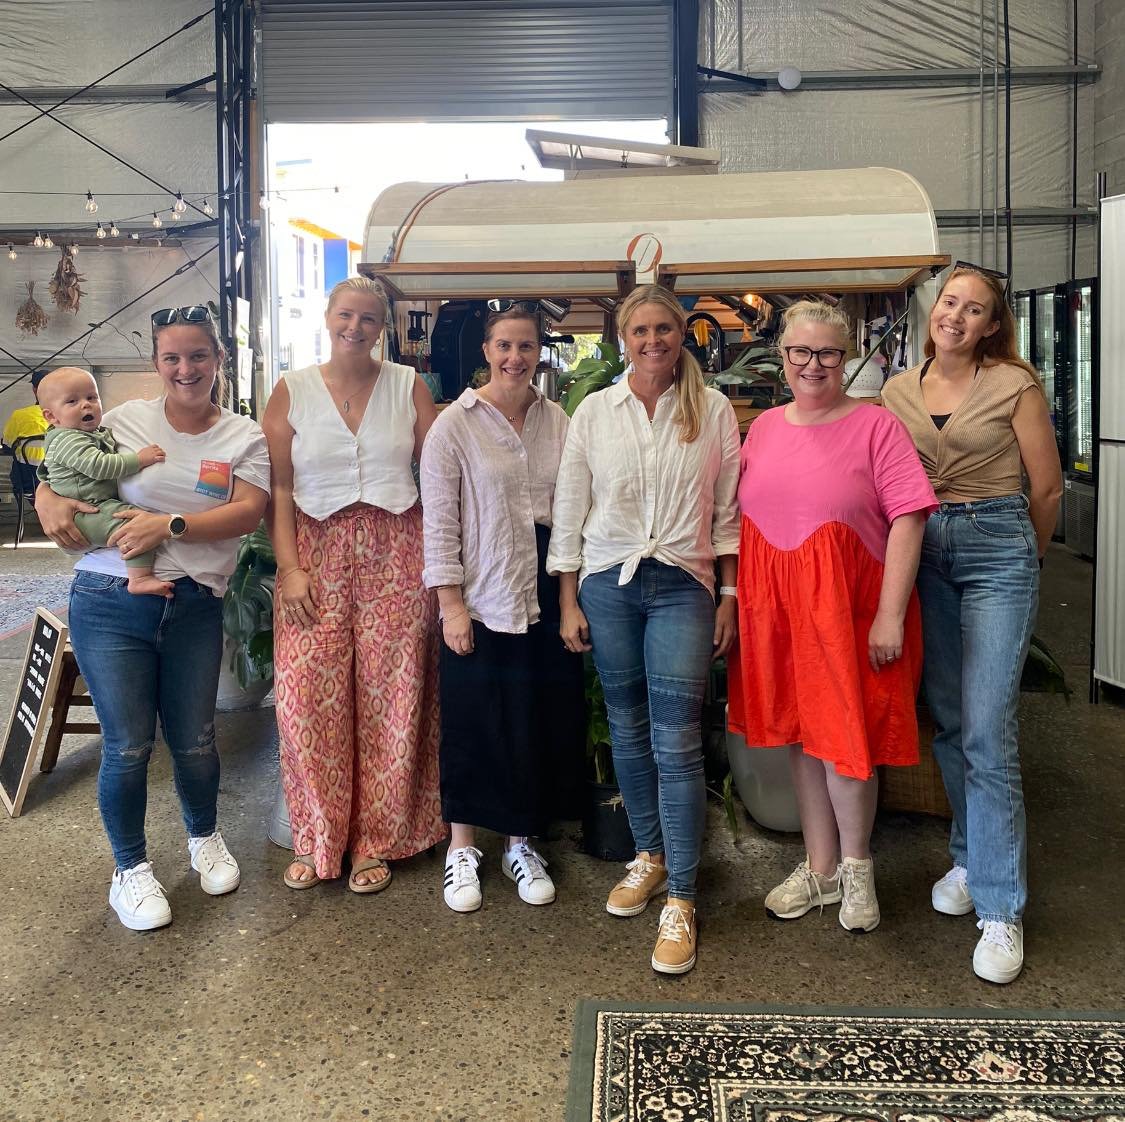 Throwback to our monthly coffee catch up earlier this month!

Thank you @moaandco_ for hosting us ☕

P.S. could blue jeans and sneakers  be the official VA uniform 👖 👟 😂